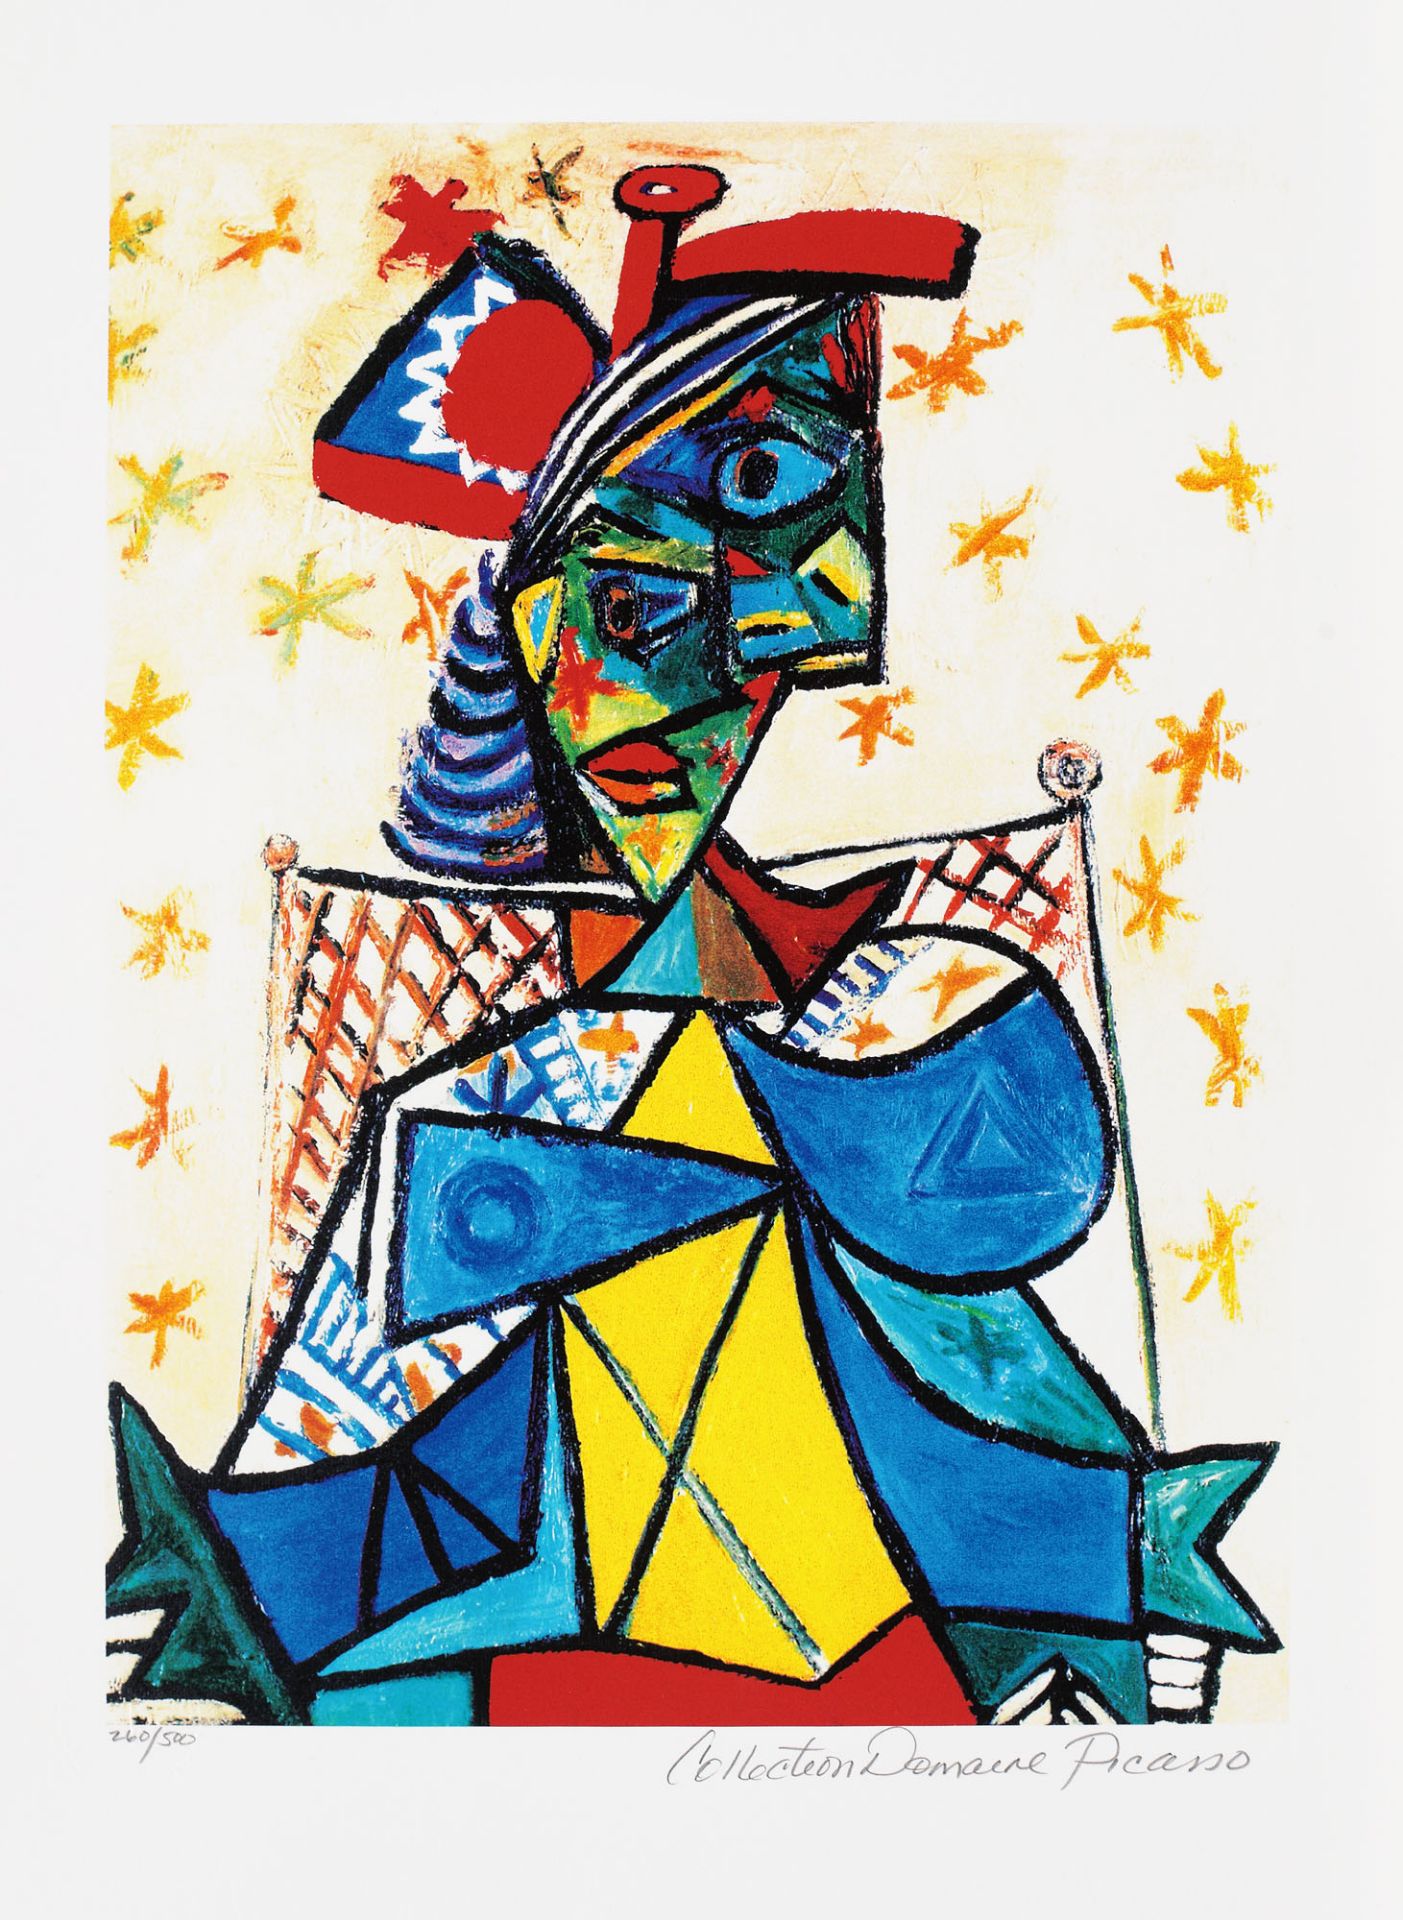 Pablo Picasso, Seated Woman with Blue and Red Hat